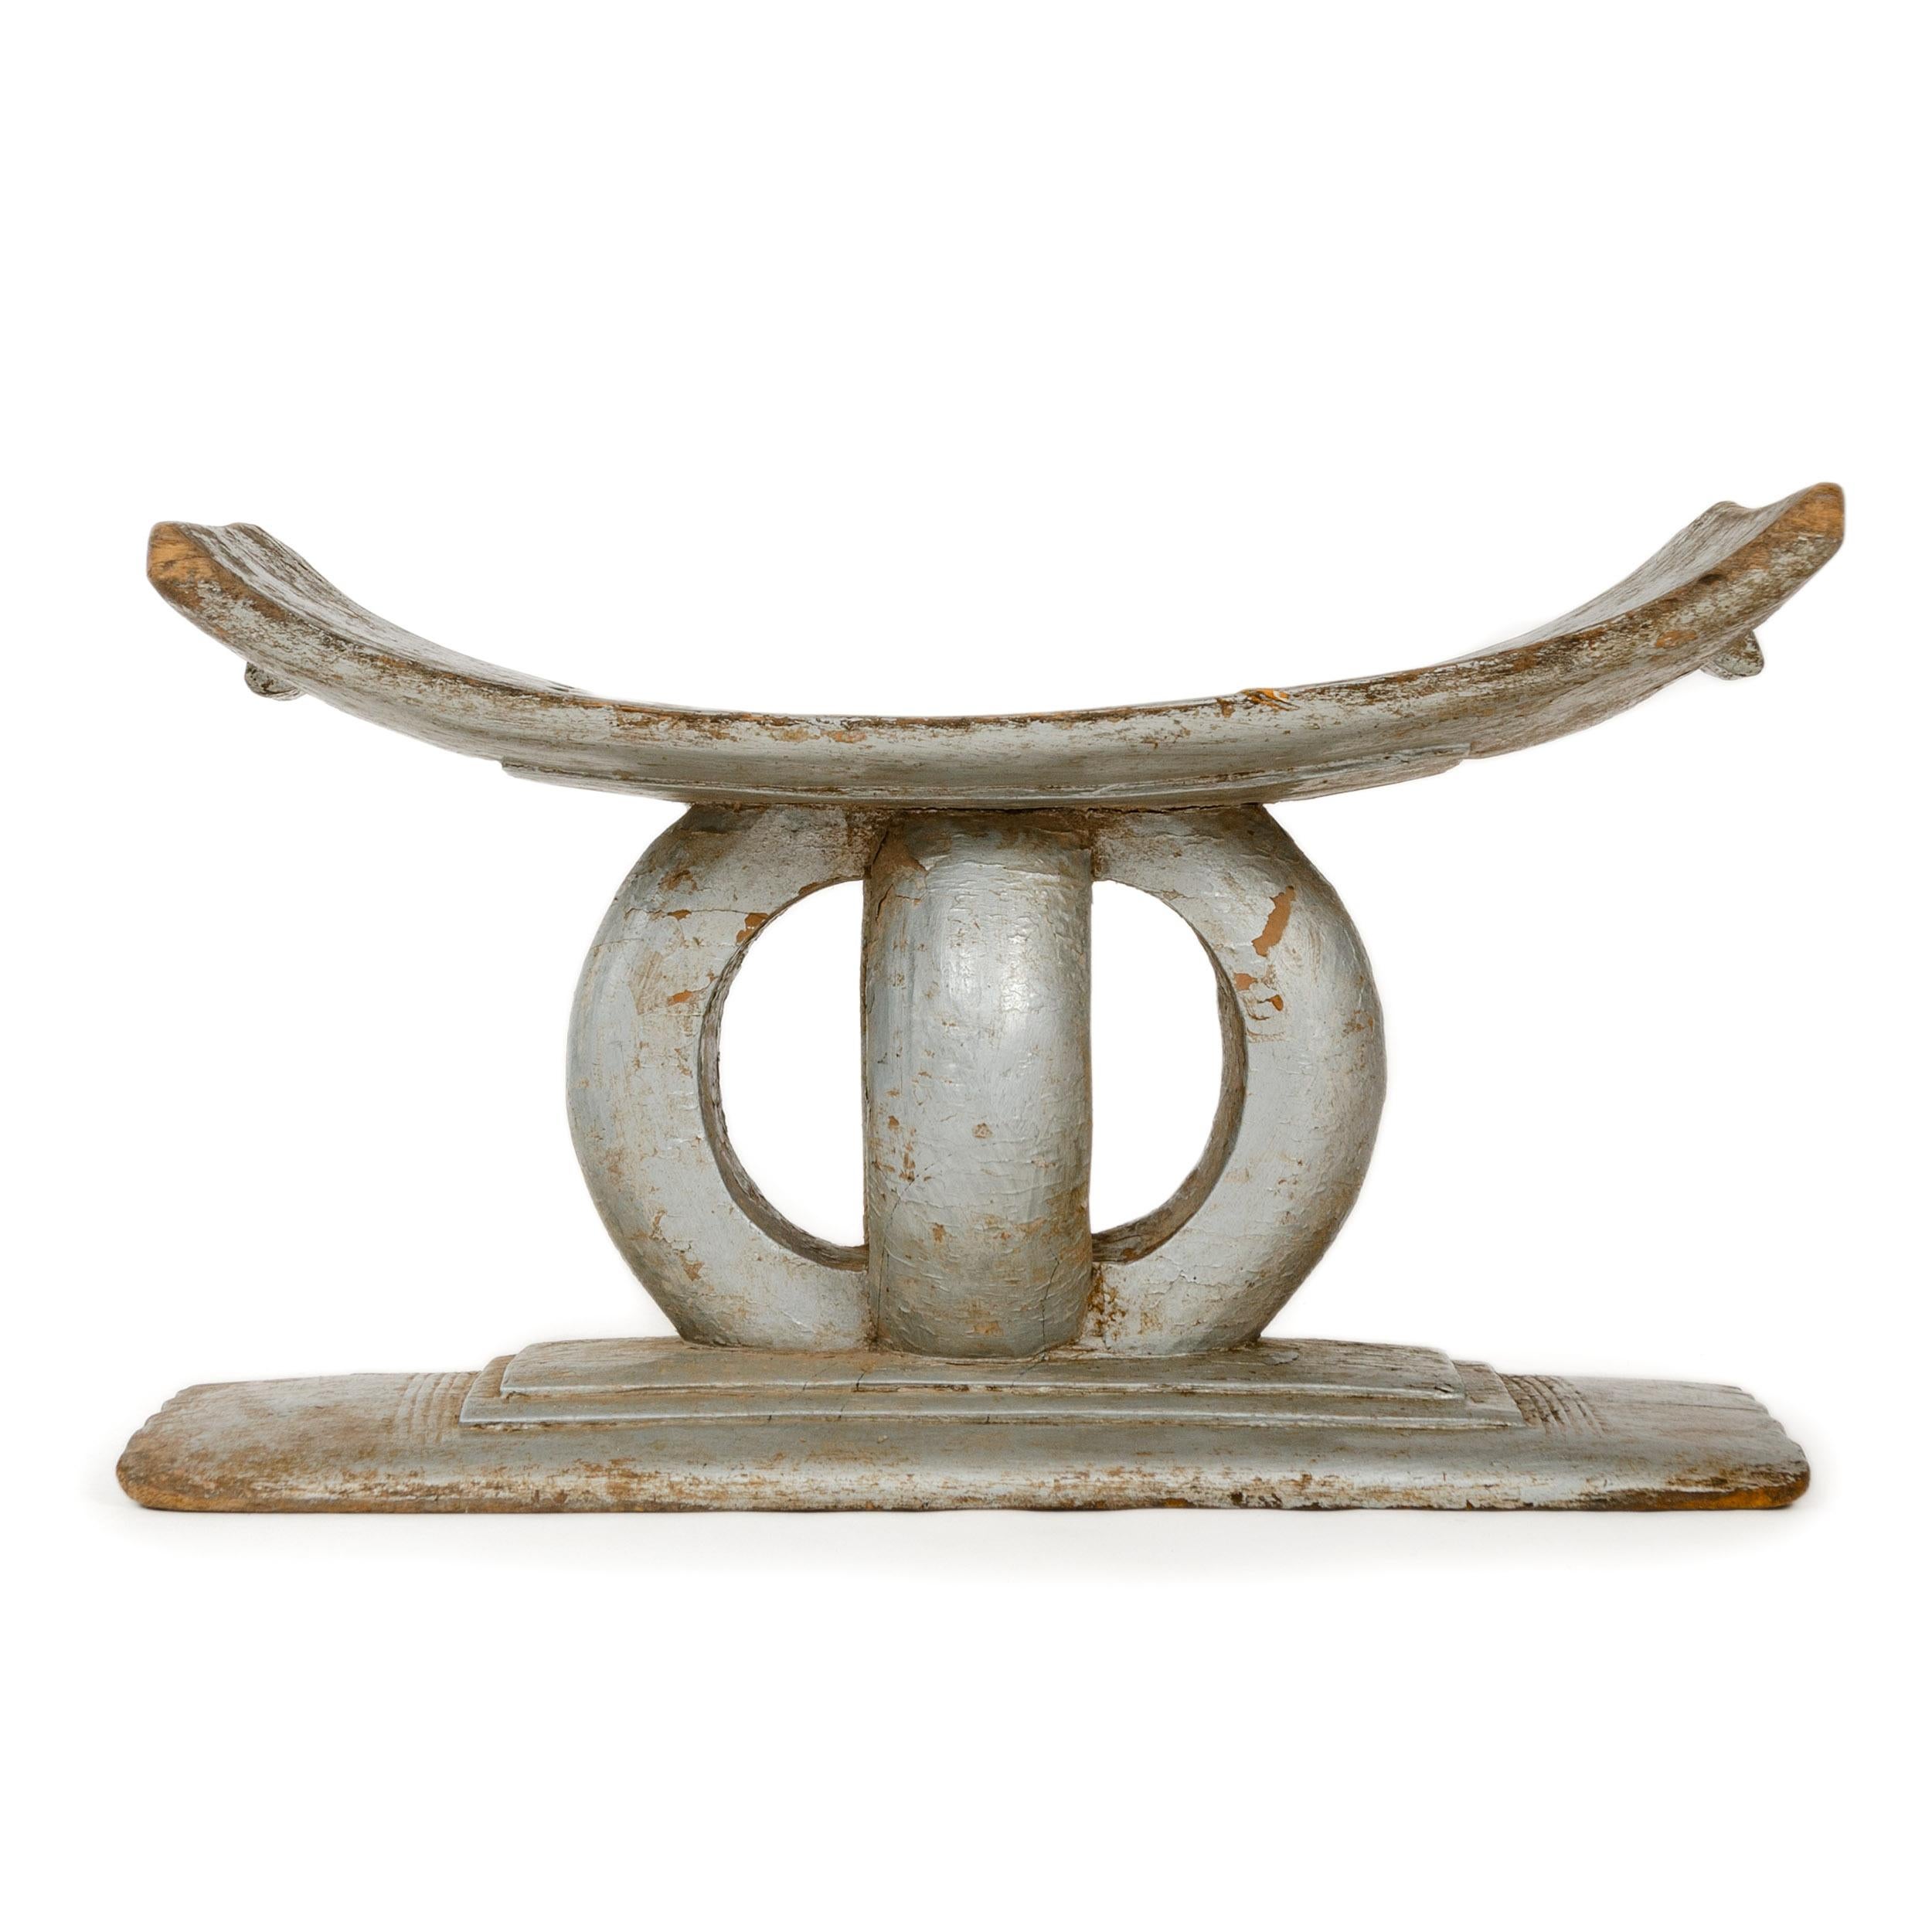 A large scale, hand carved and silver painted Ashanti tribal stool. Likely painted silver in the 1920s to compliment metallic trend of the Art Deco movement.